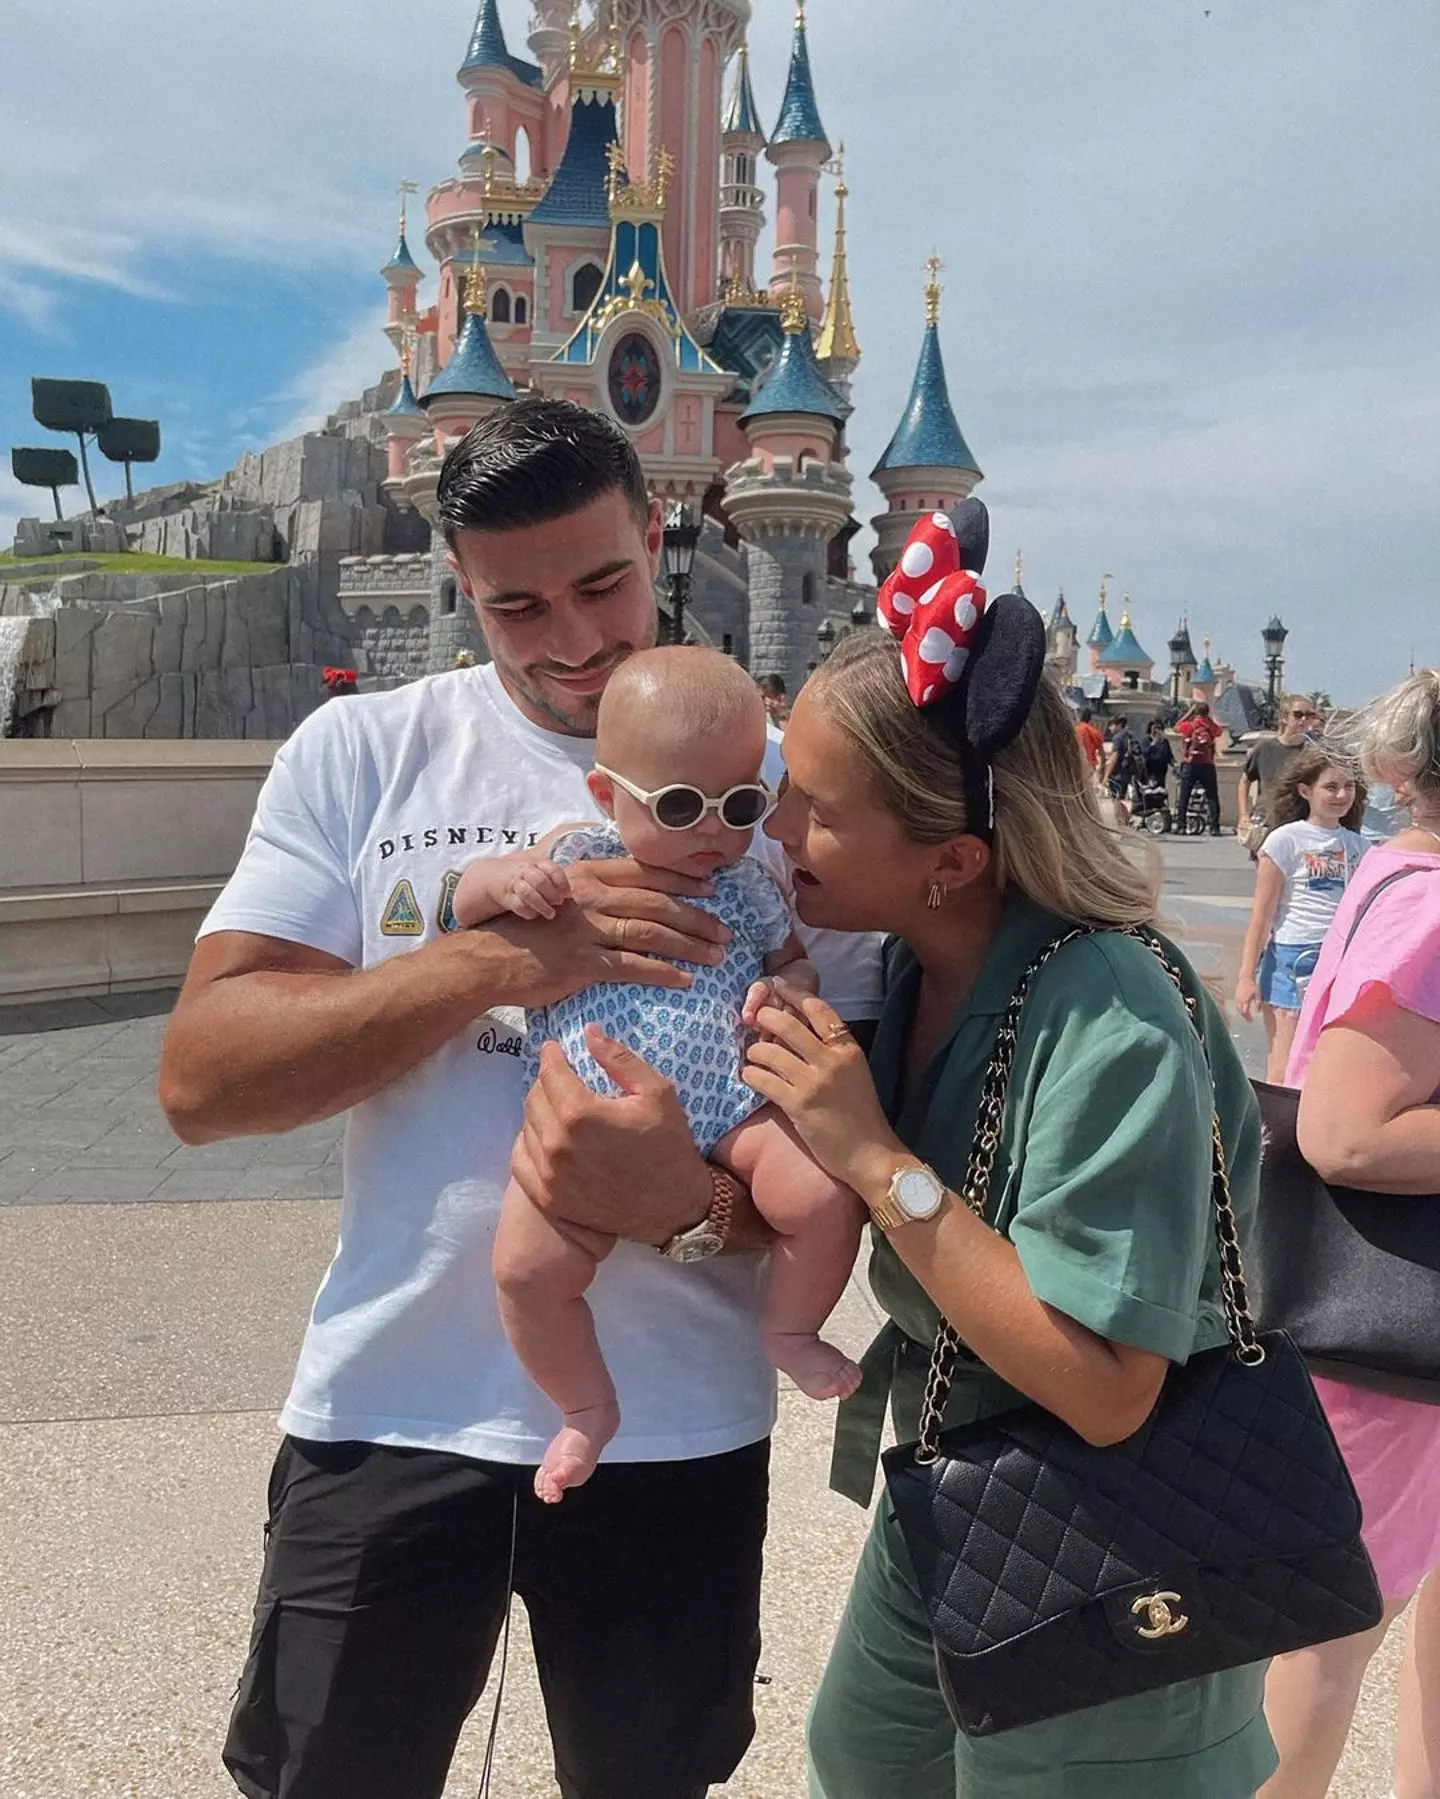 Molly-Mae admitted to struggling while fiancé Tommy Fury has been away.